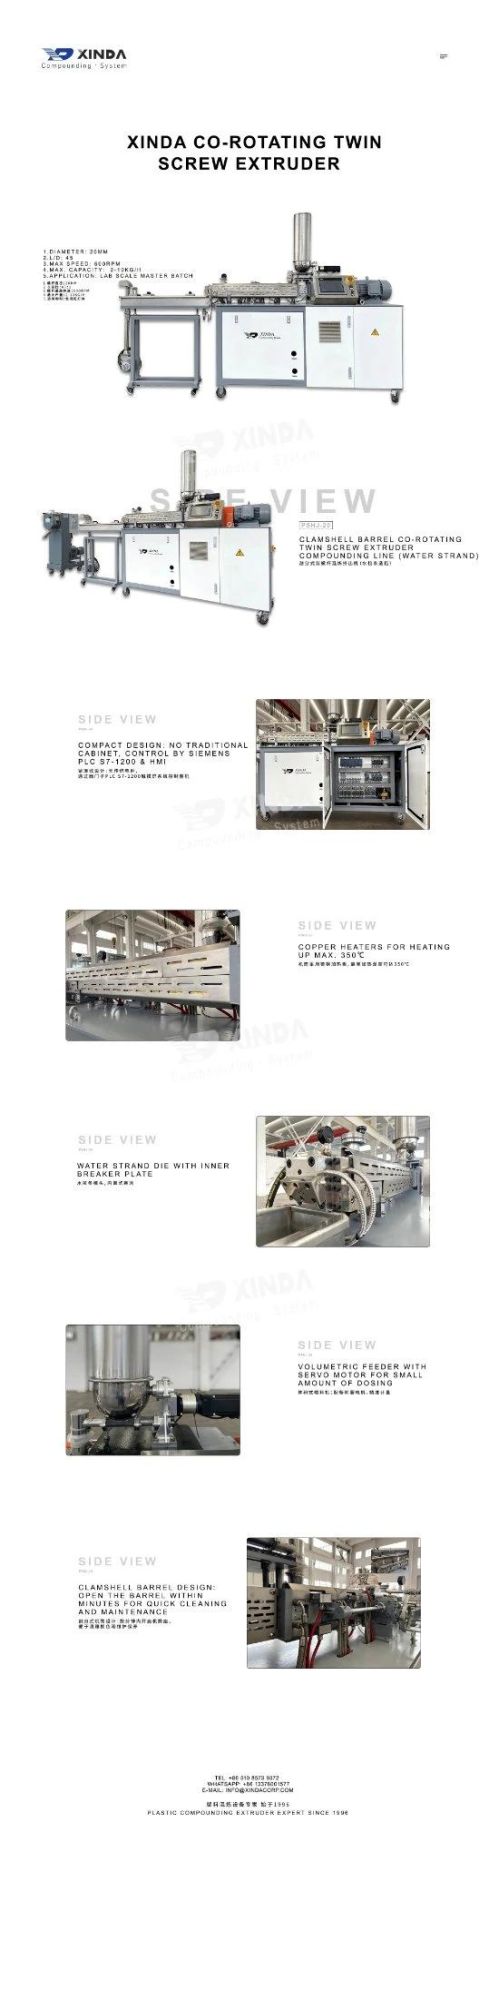 Clamshell Barrel Lab Application or Small Scale Production Twin Screw Extruder